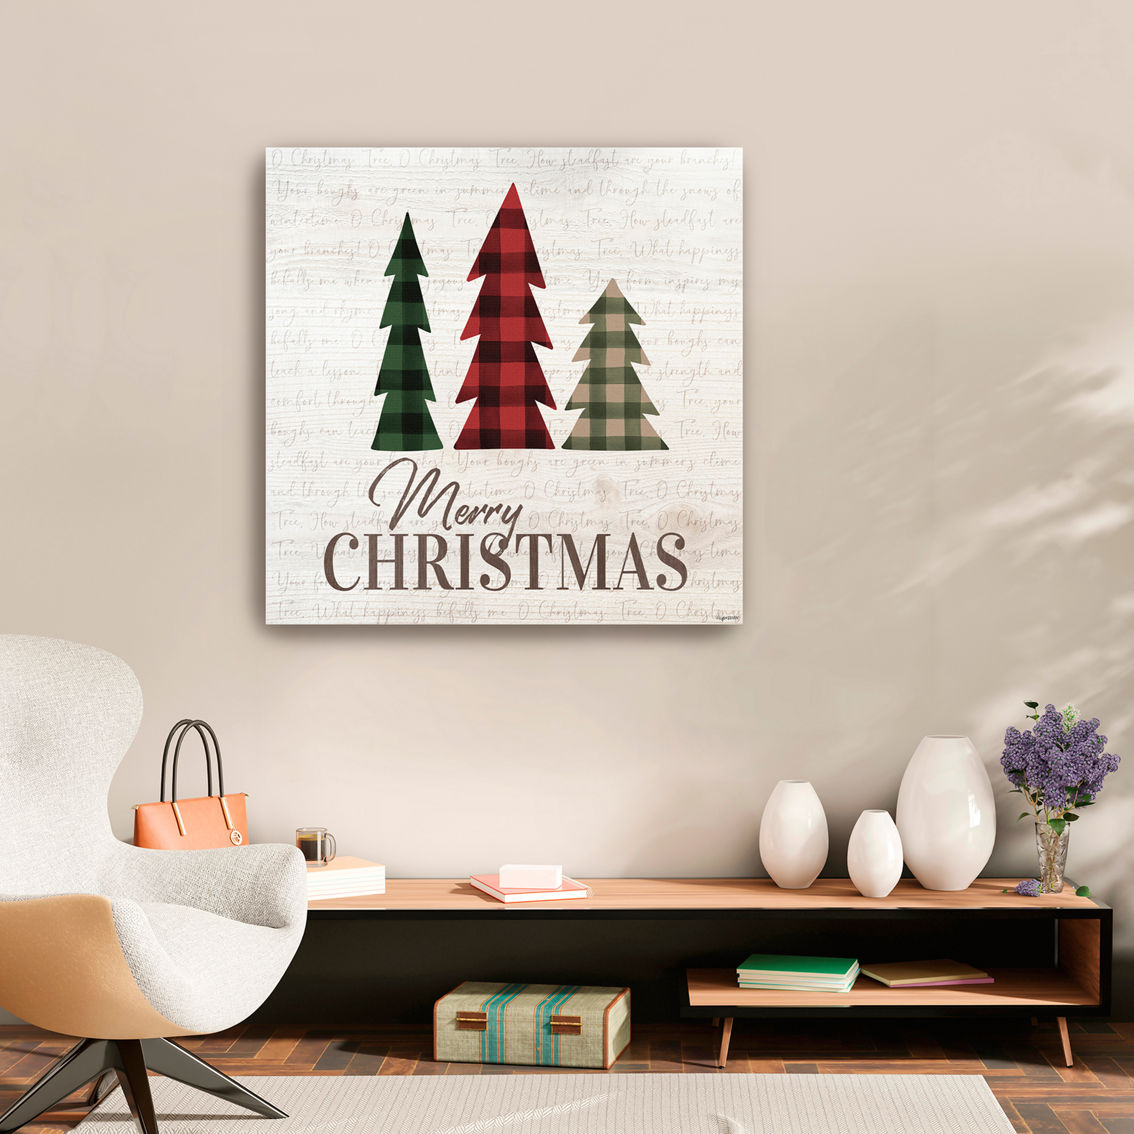 Inkstry Merry Christmas Canvas Giclee - Image 3 of 3